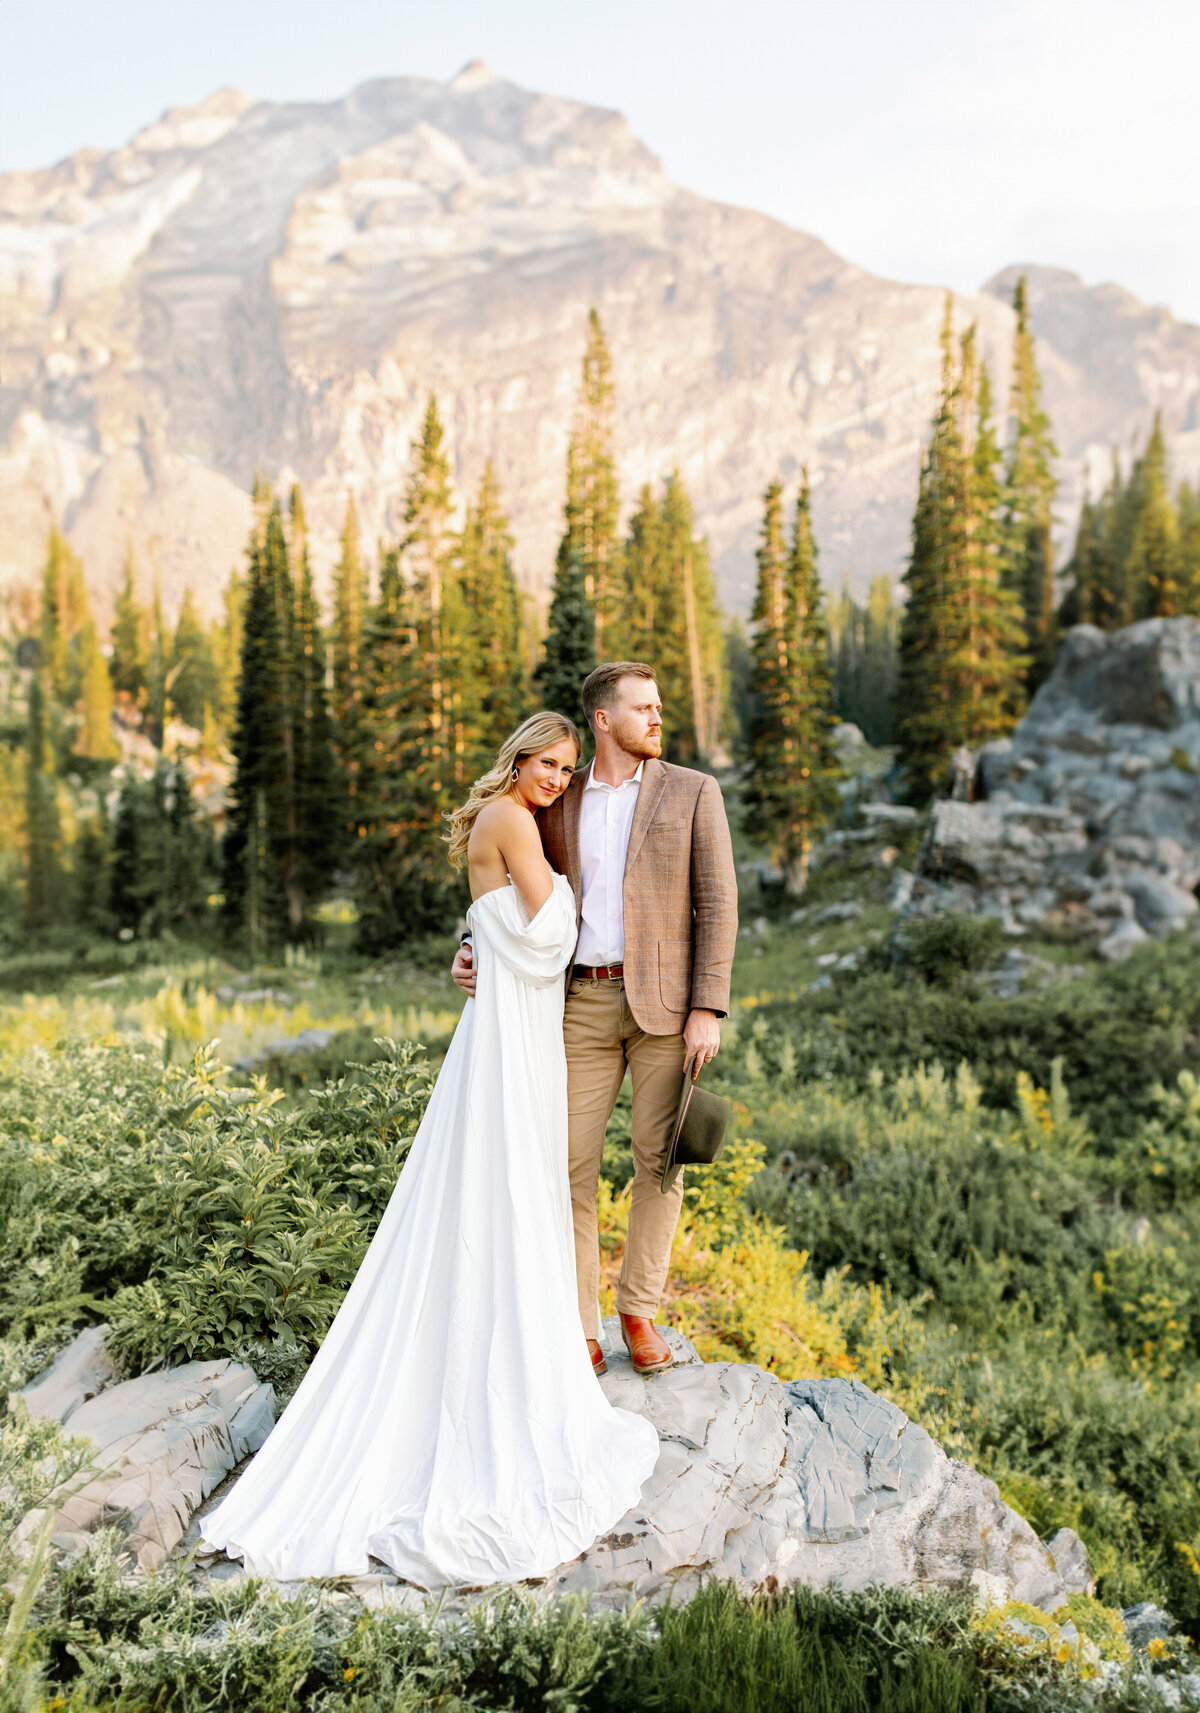 Maddie Moore Photography captures bride and groom at elopement in Utah